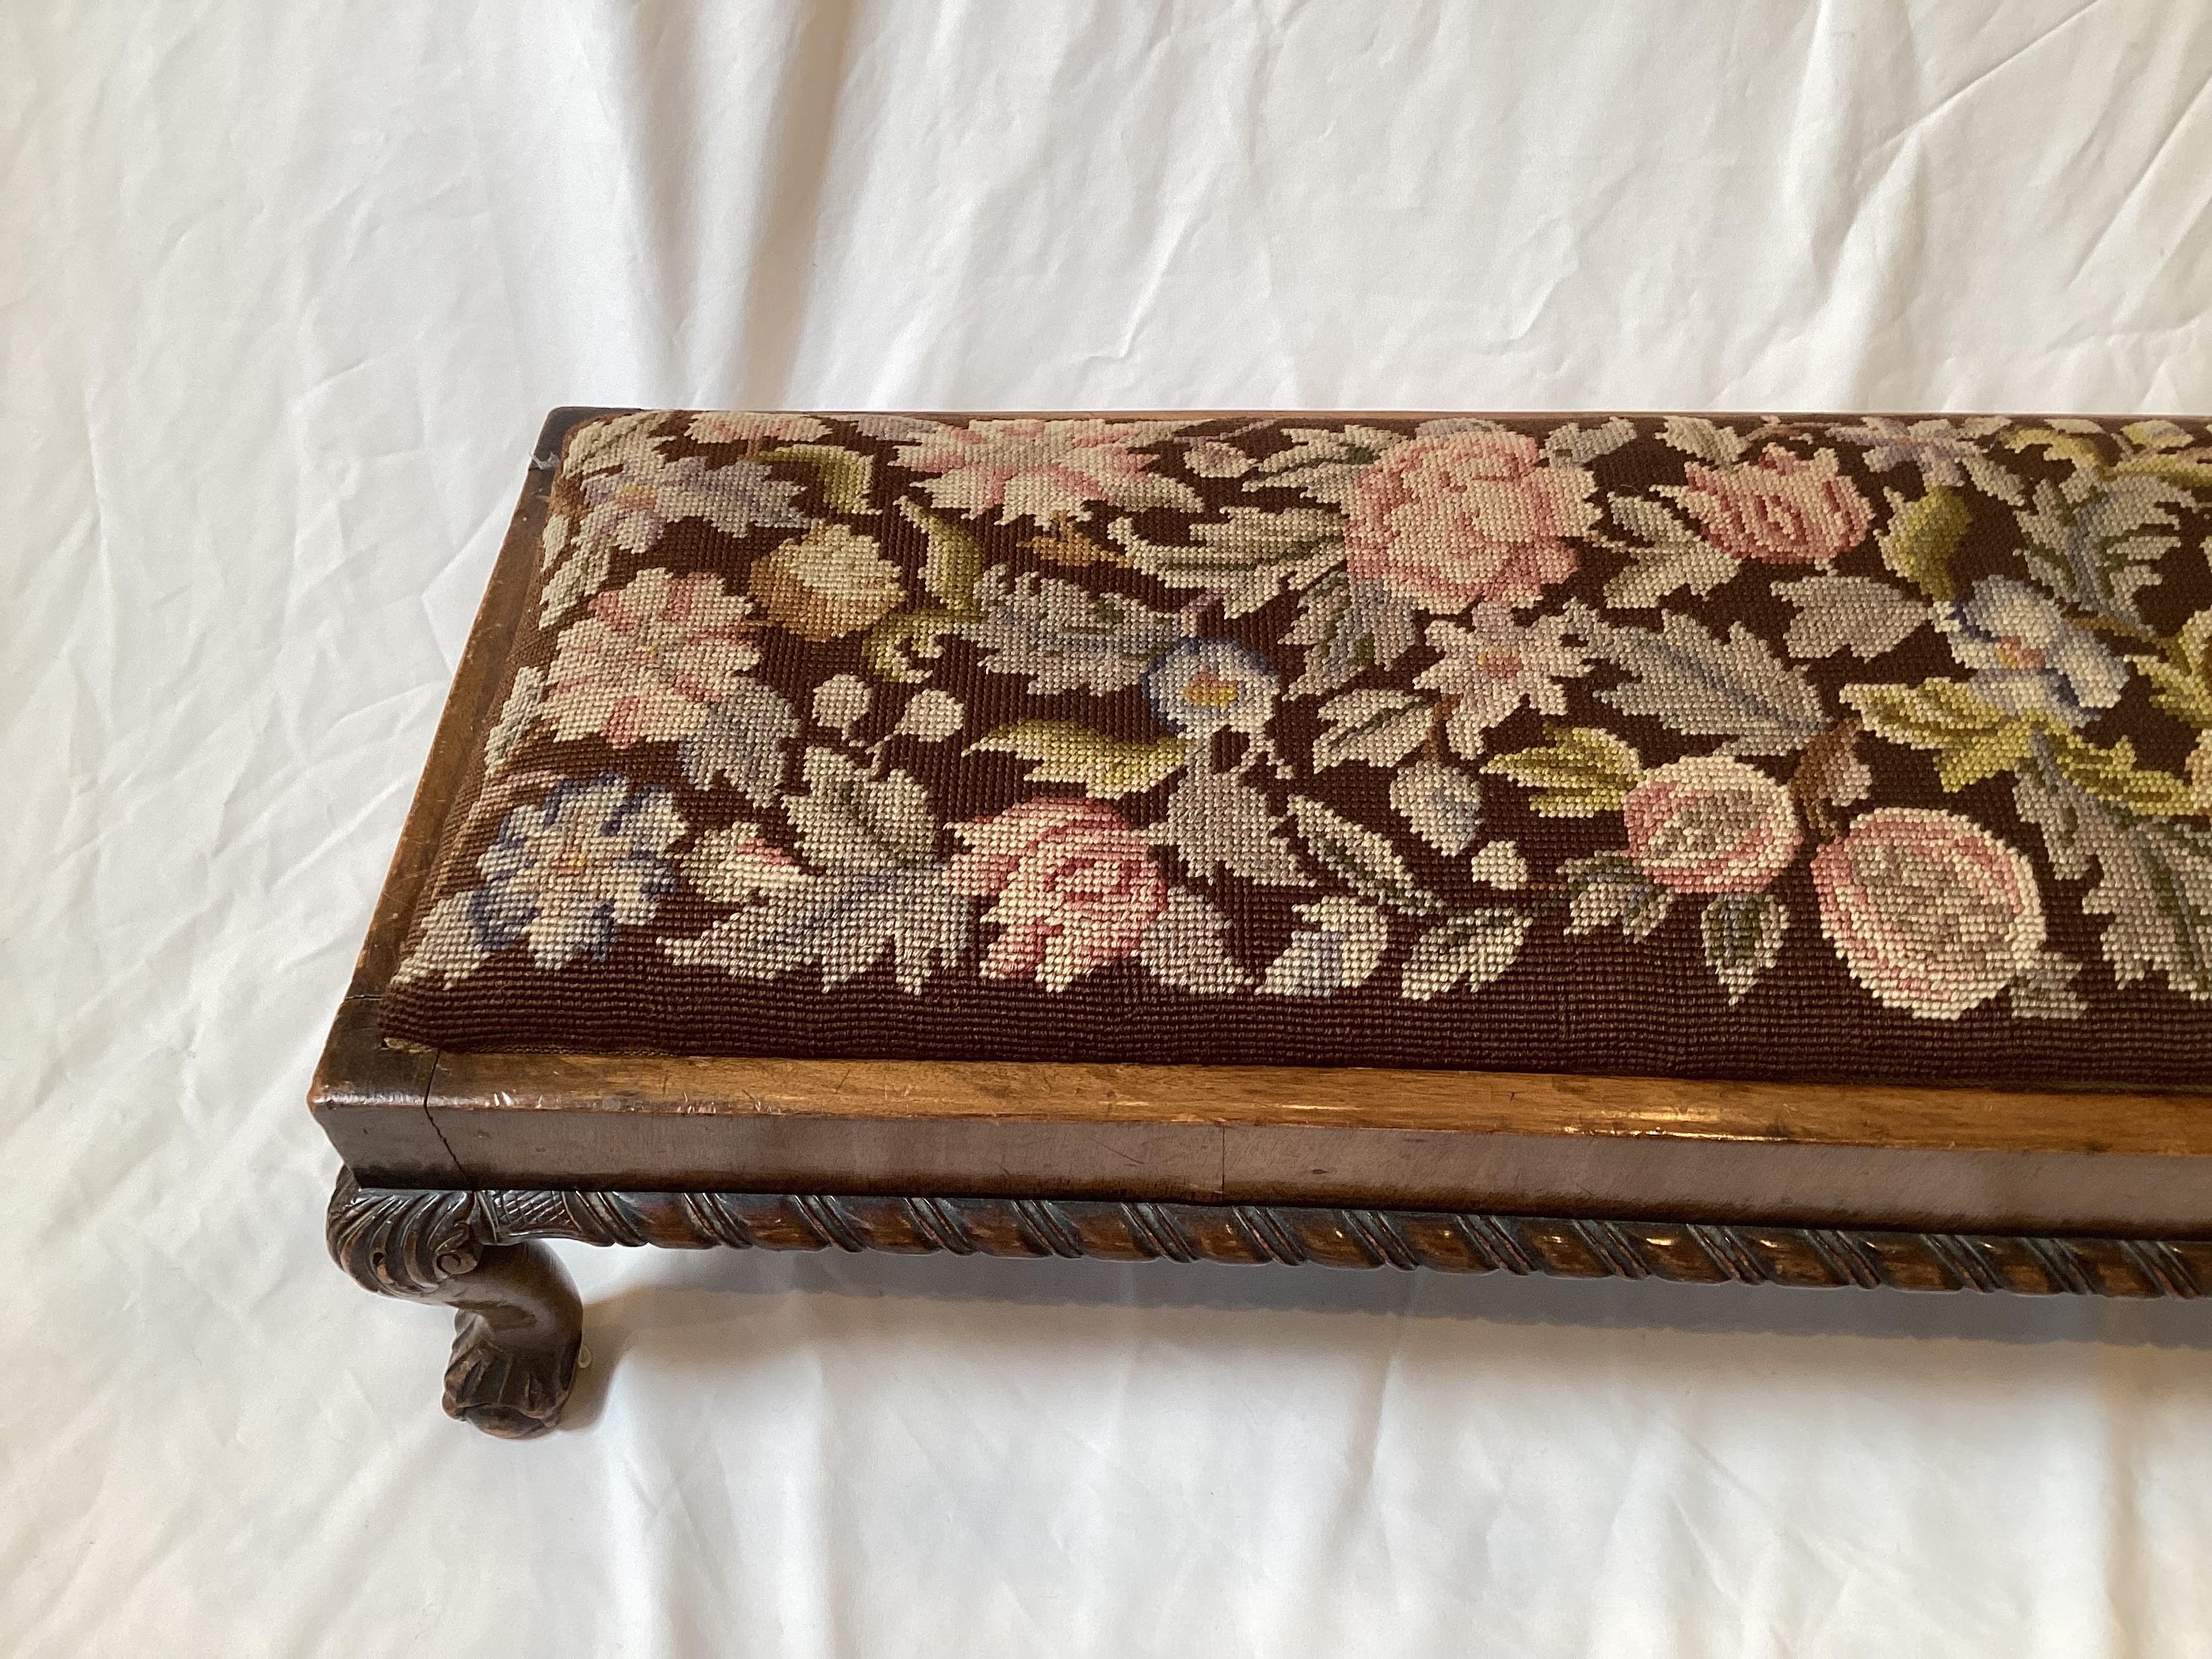 A 19th century hand carved walnut diminutive bench. The carved rope edge with cabriole leg with a hand stitched floral wool needlepoint top. Diminutive size, more of a footrest at 9.5 inches tall, 40 wide, 12 deep.